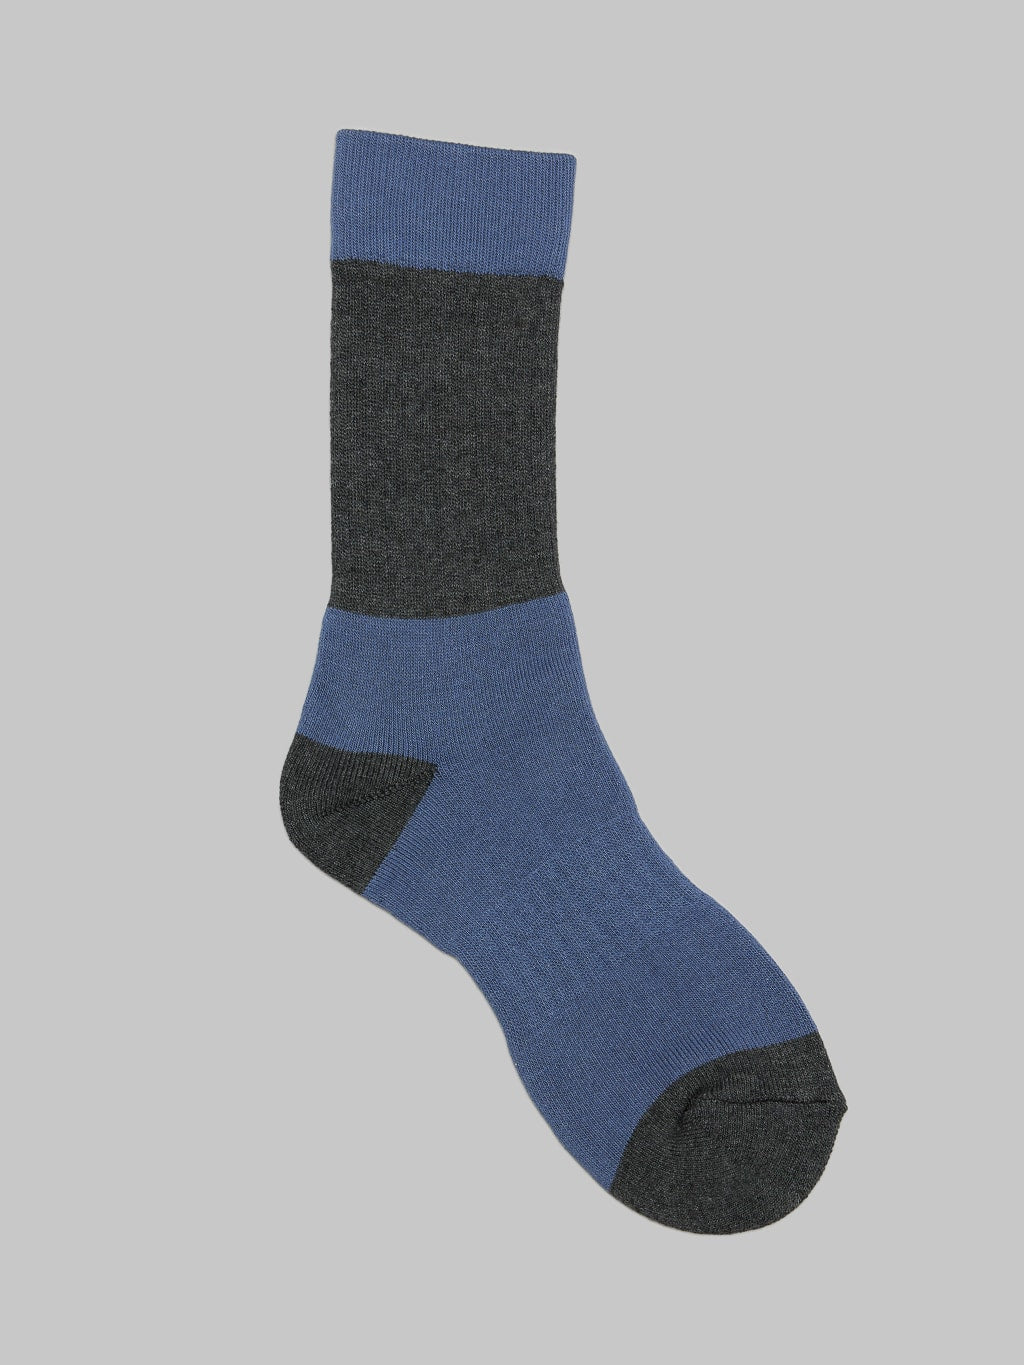 trophy clothing regular boots socks navy one size